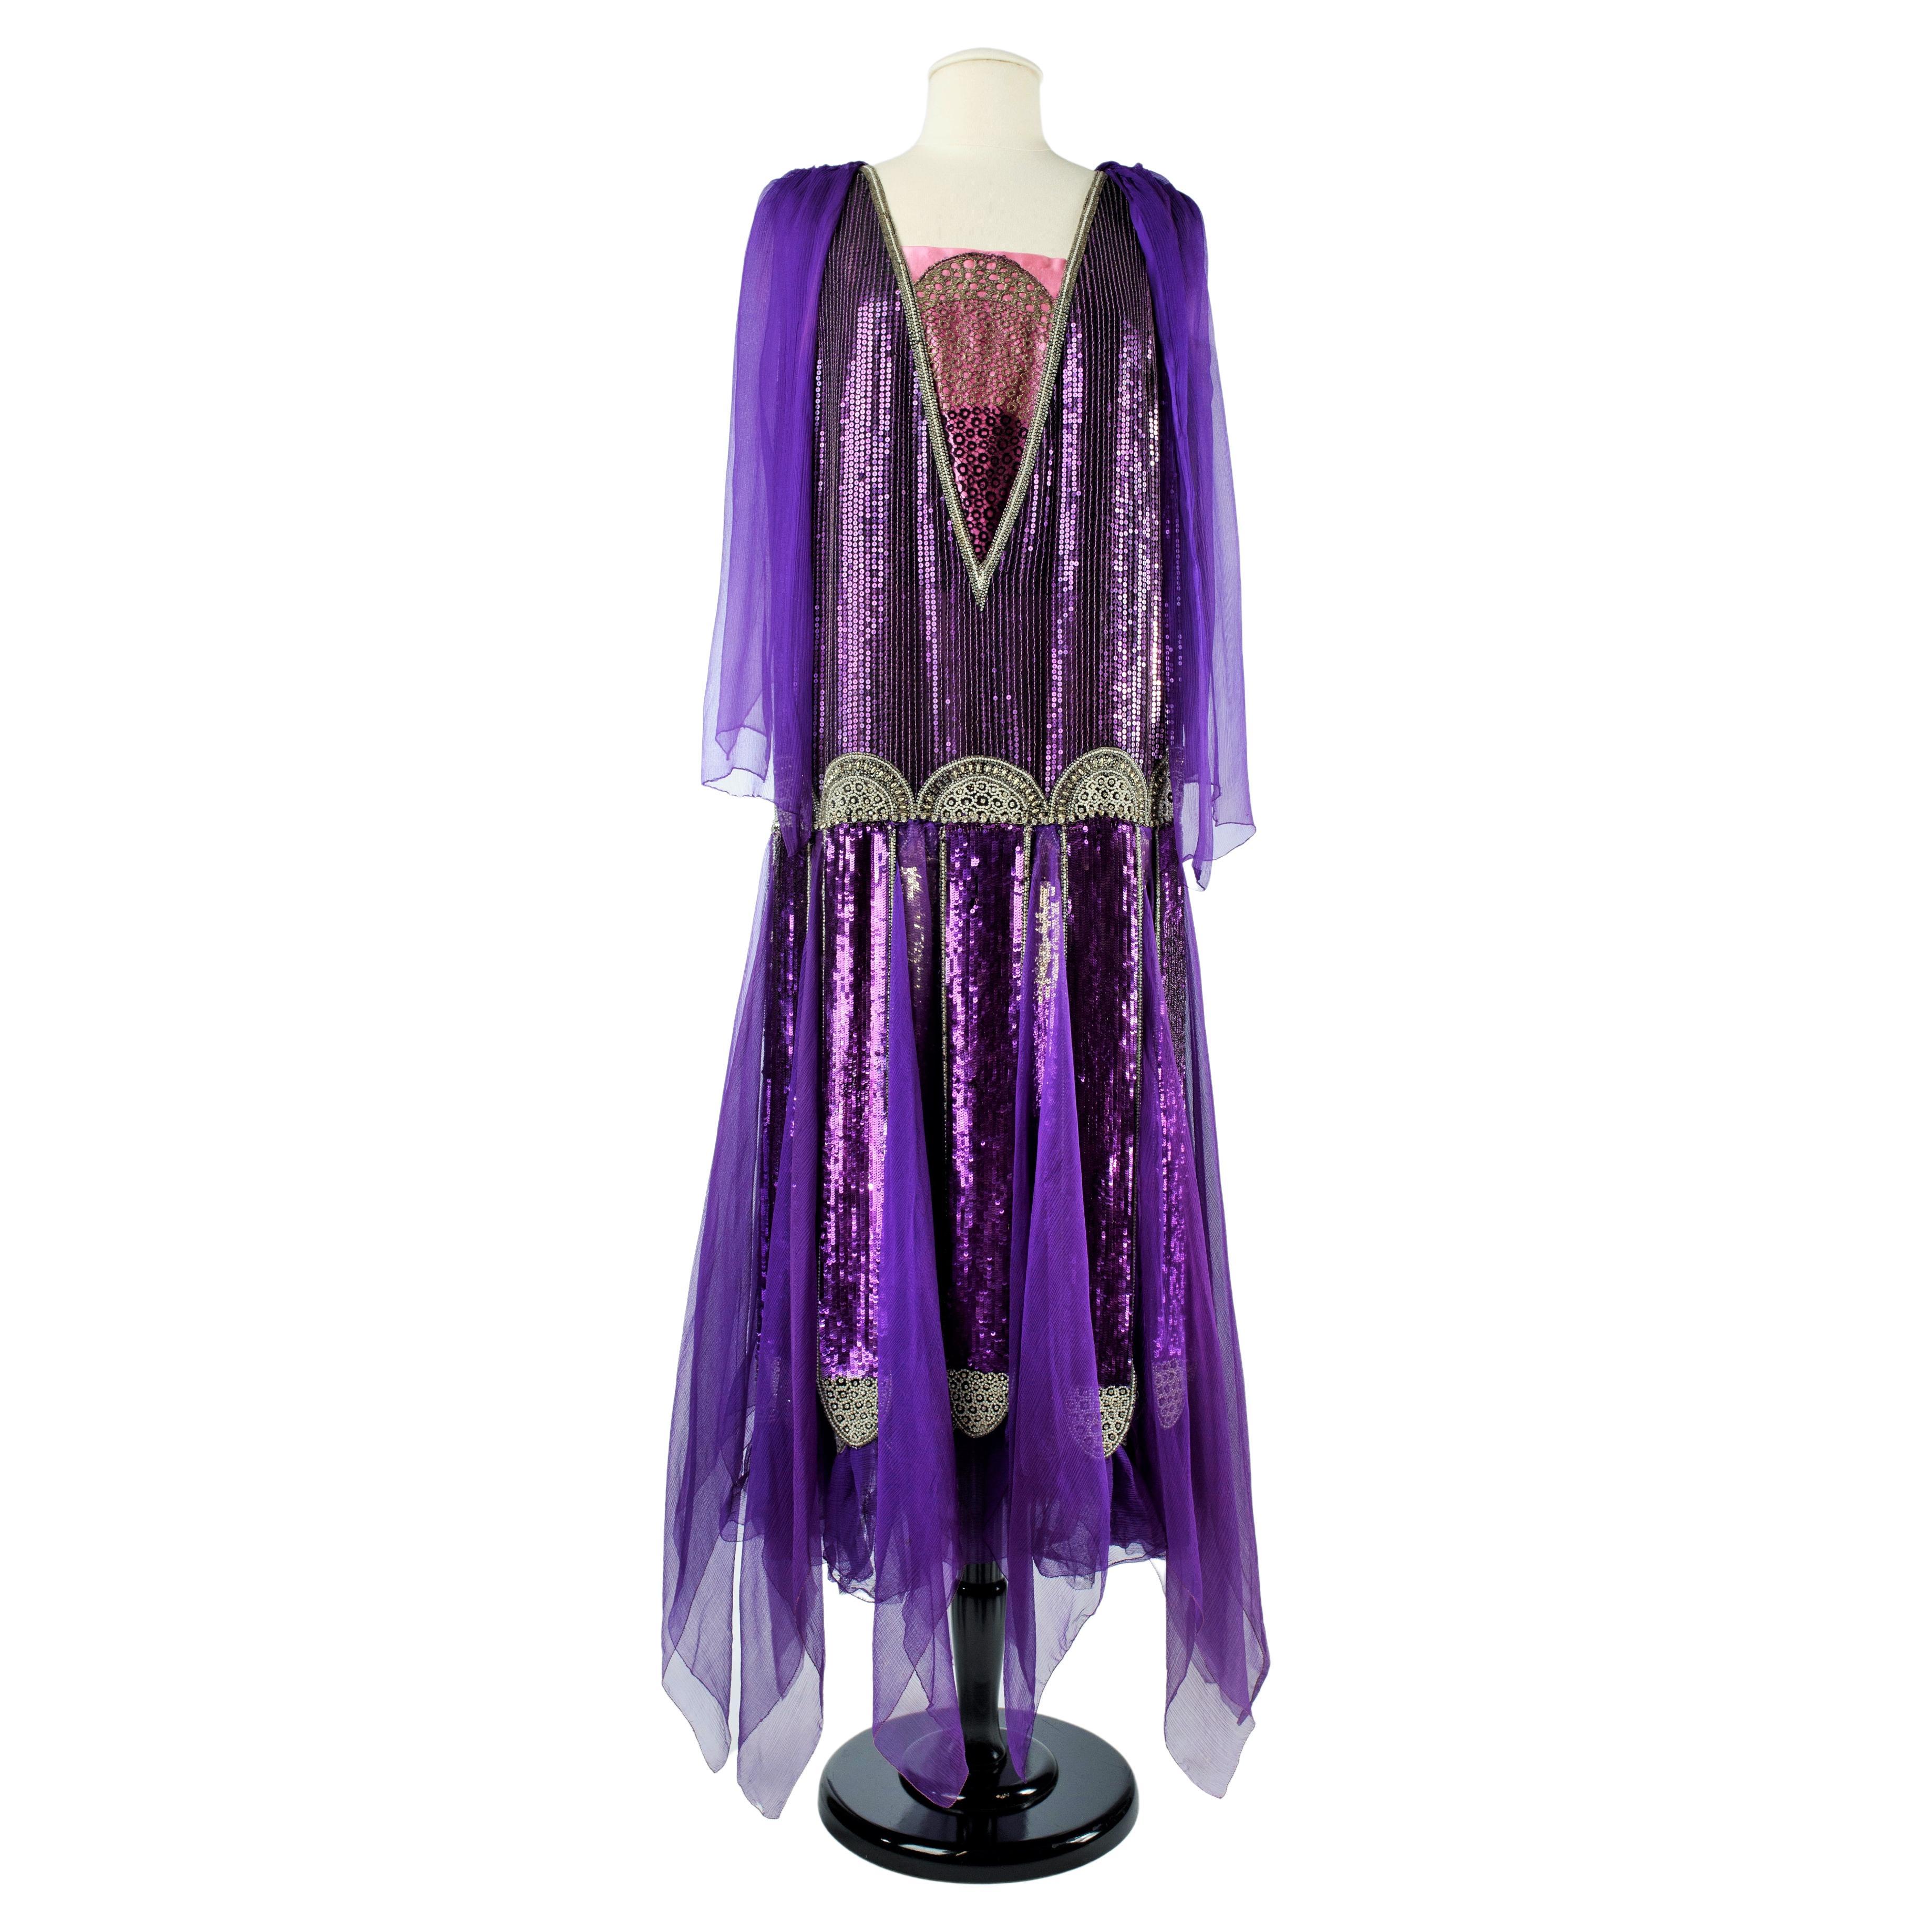 A Paul Poiret Ball Gown in Sequined Silk Crepe and Satin - France Circa 1925 For Sale